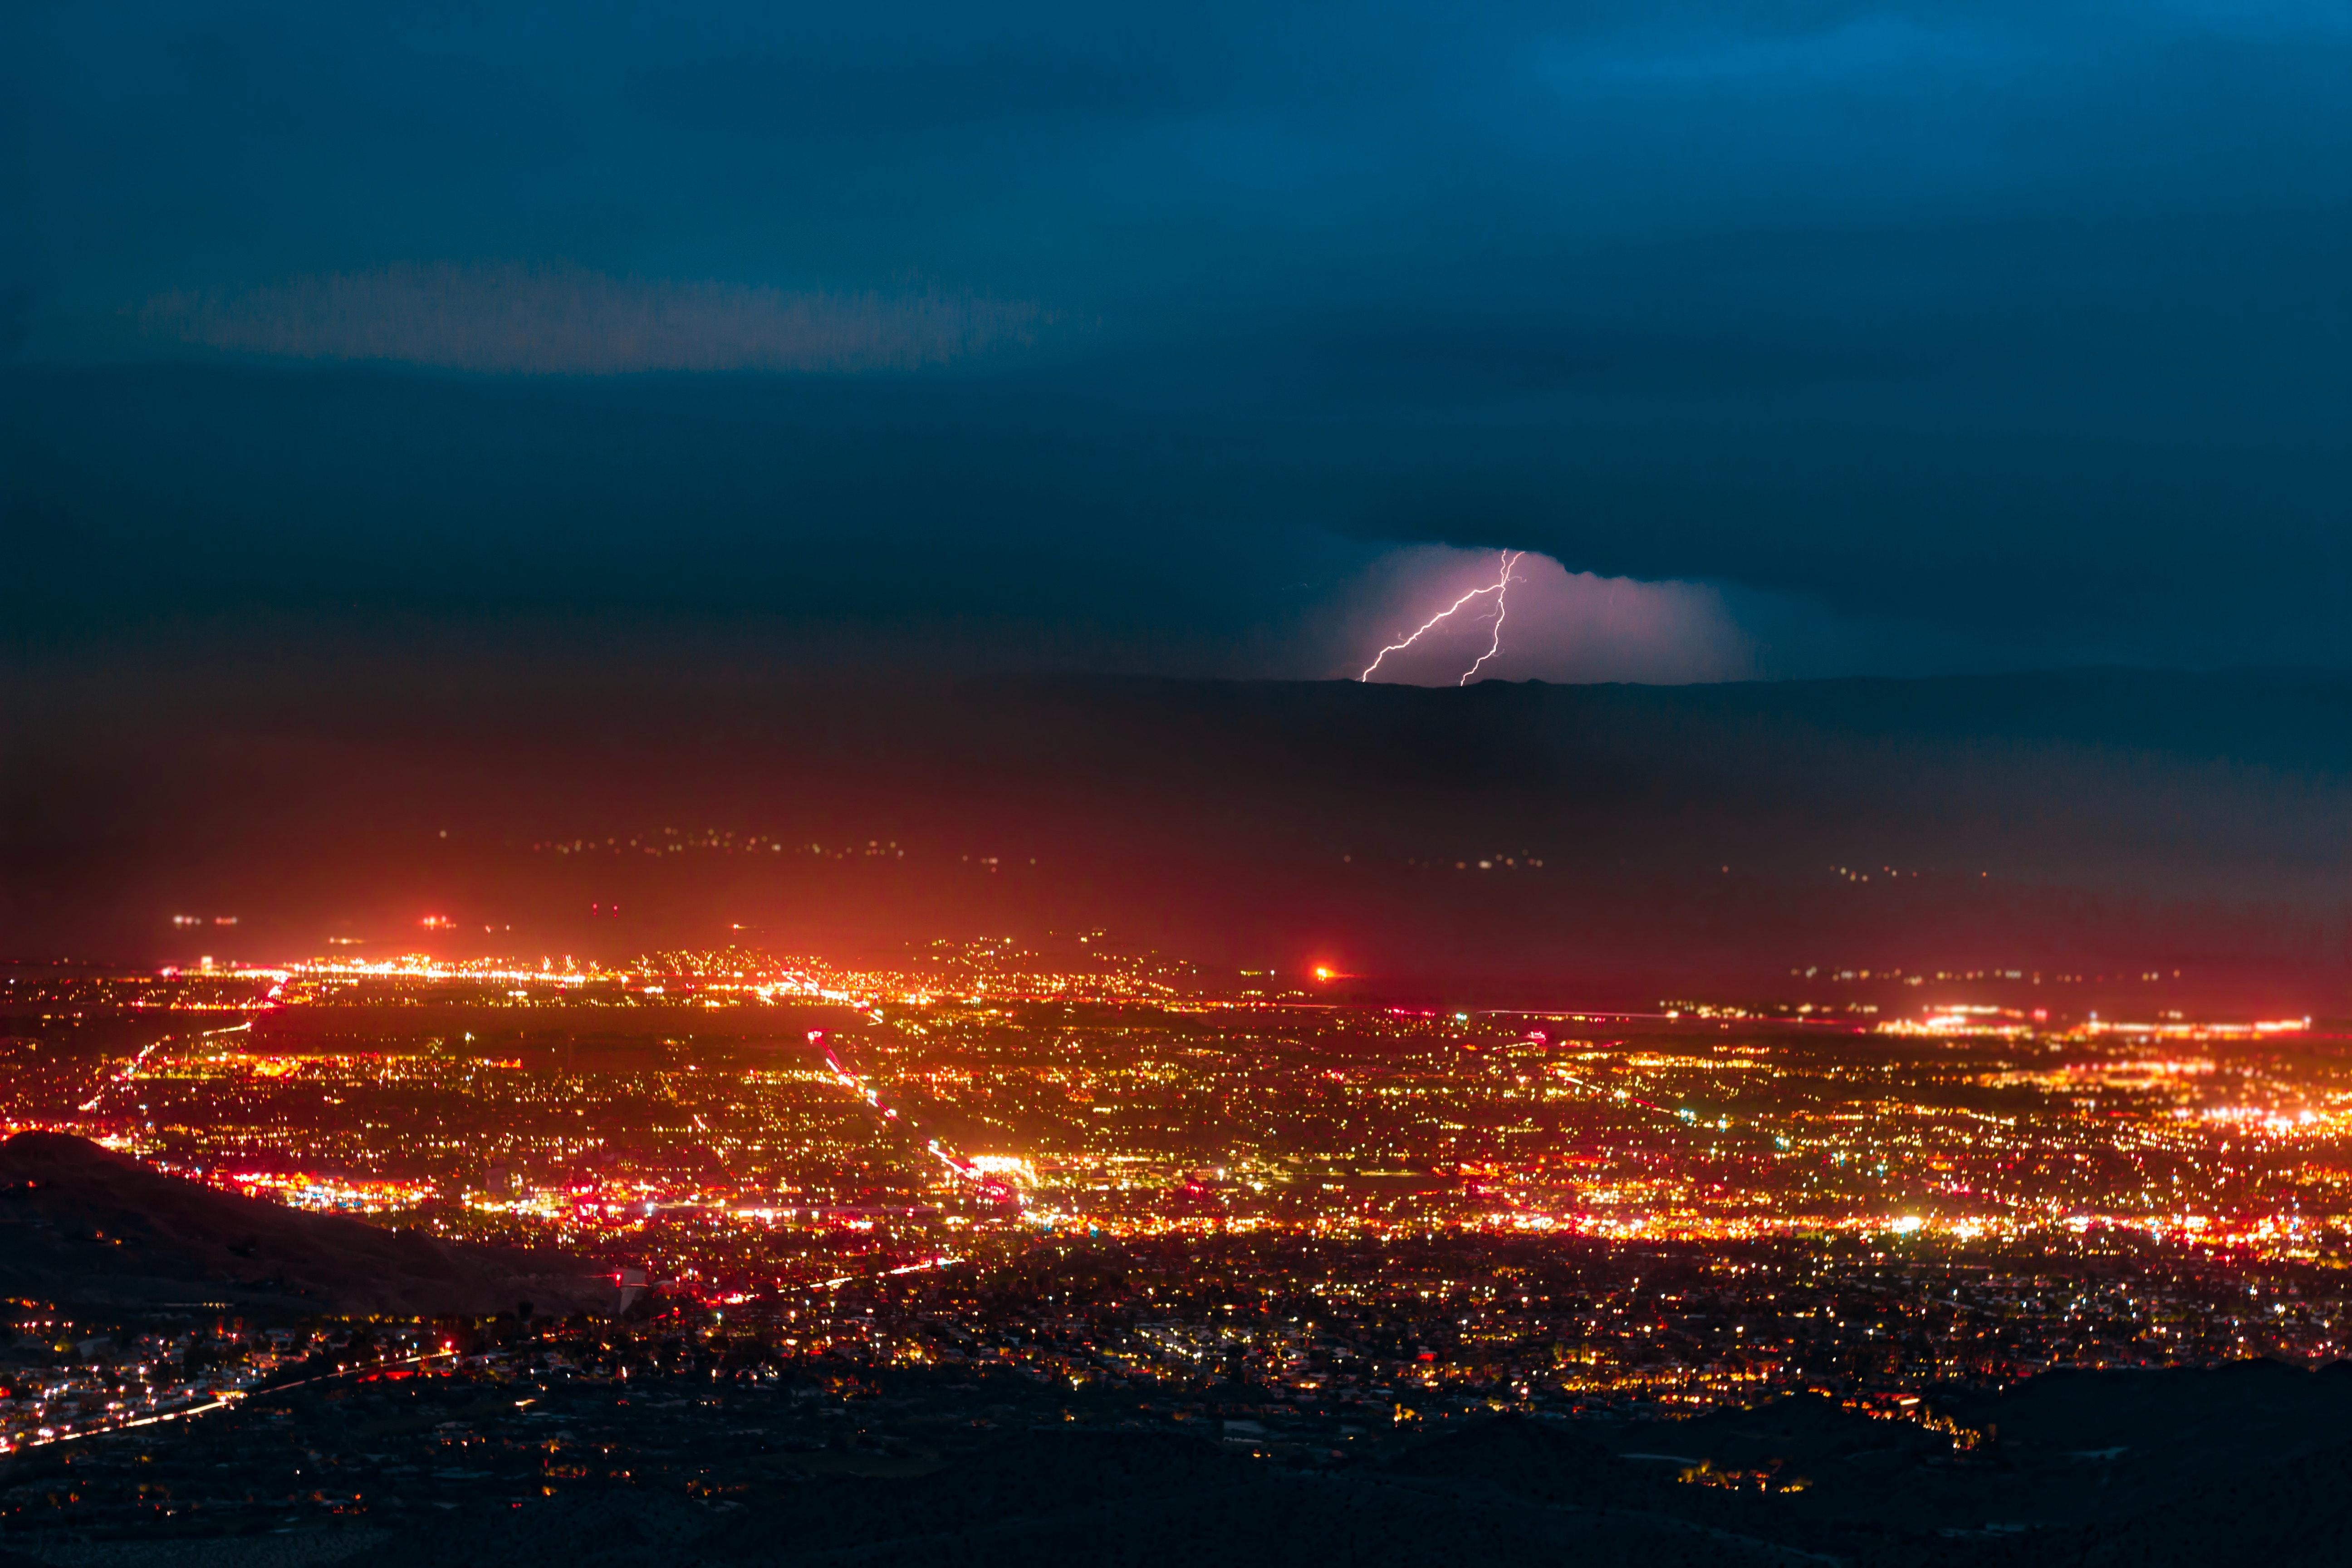 Aerial photography of urban city overlooking lightning during nighttime